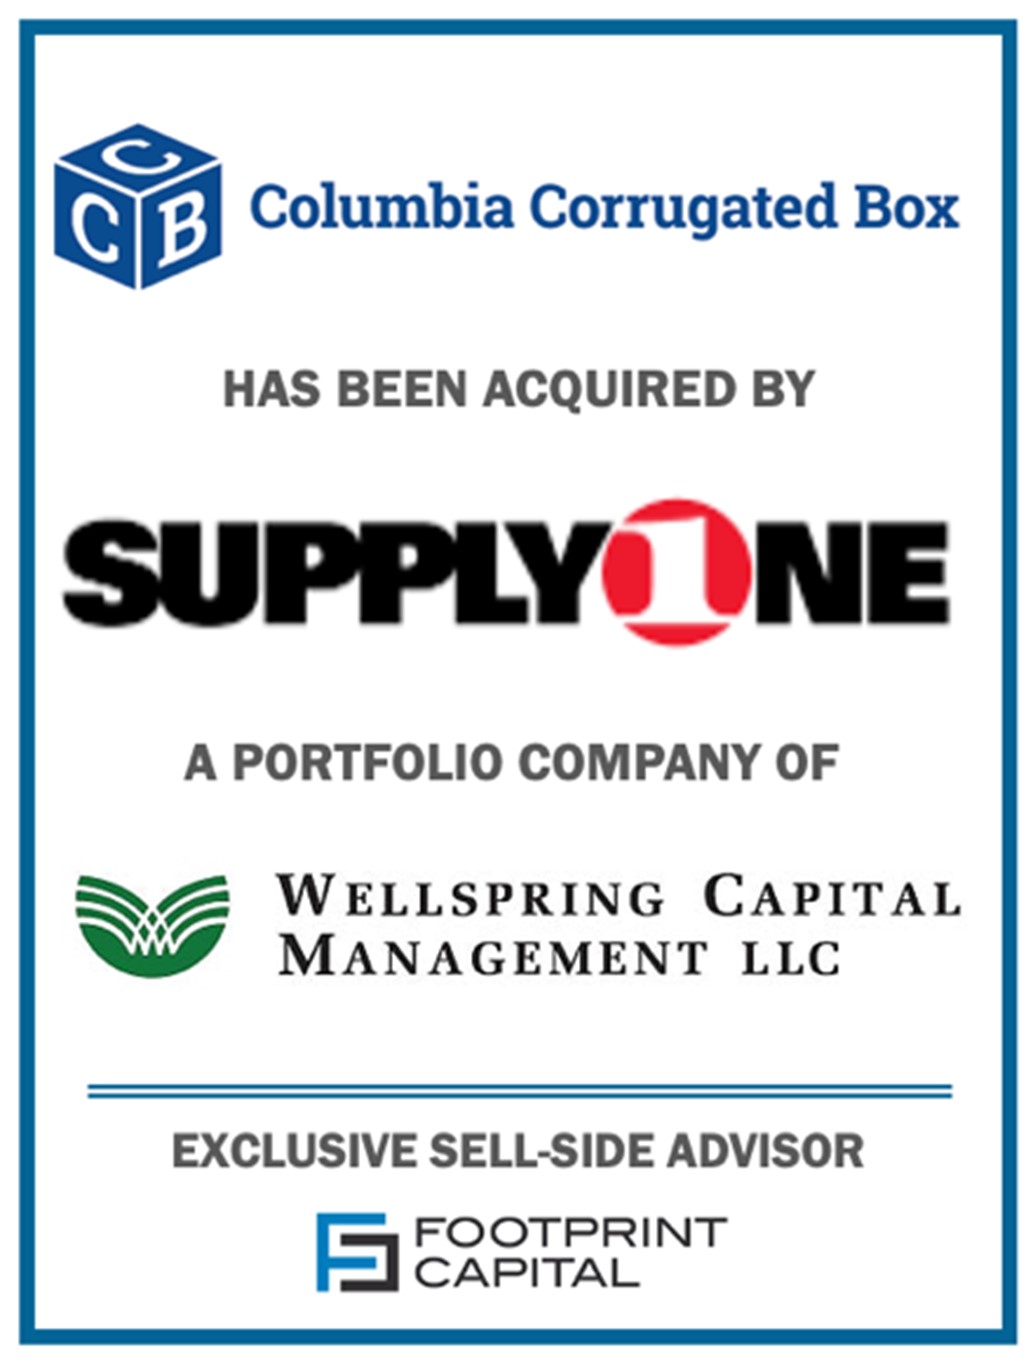 Footprint Capital Advises Columbia Corrugated Box in Sale to SupplyOne, the Largest Independent Supplier of Corrugated and other Packaging Products in North America 